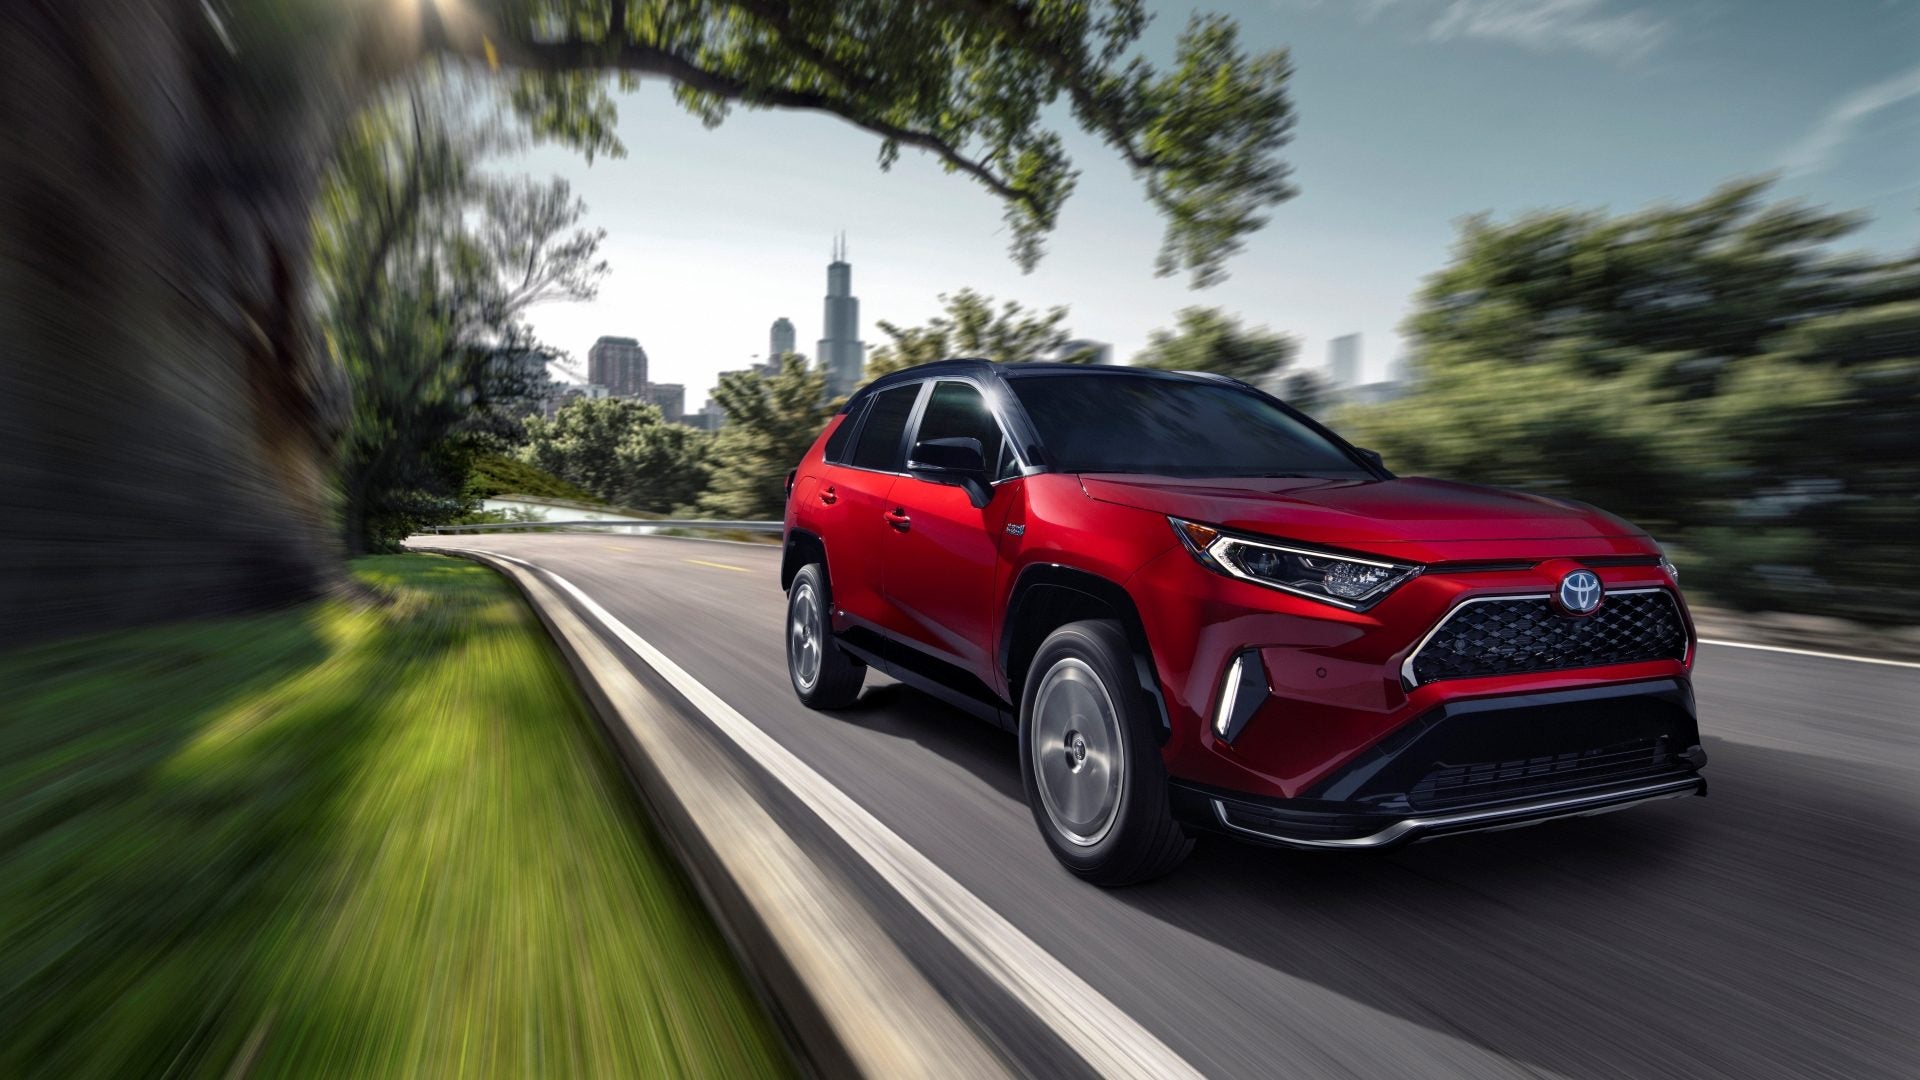 2021 Toyota RAV4 Prime Gets 90 MPGe, Does 0-60 Faster Than a Porsche Macan